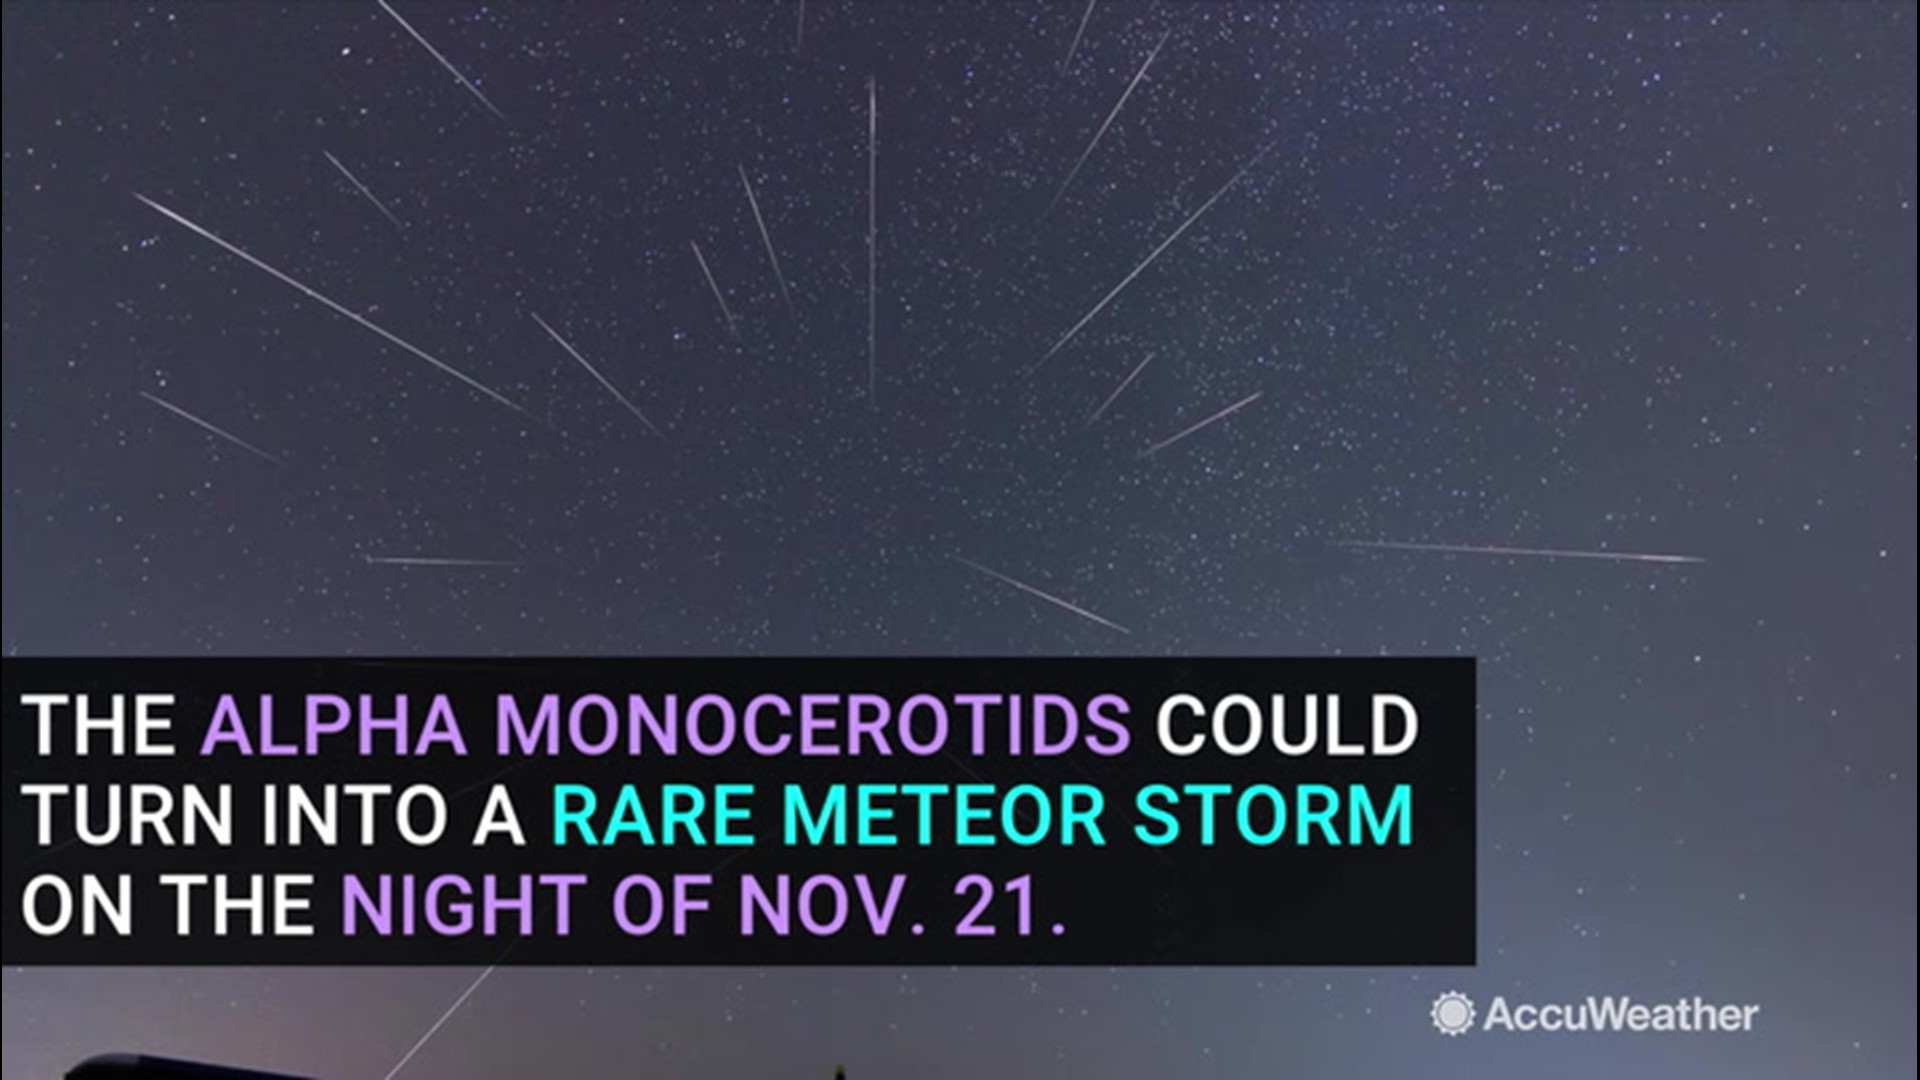 This week's upcoming meteor shower, the Alpha Monocerotids, may not be your typical meteor shower. Astronomers say the shower could produce a storm of hundreds of meteors. Its name is Greek for 'unicorn.'